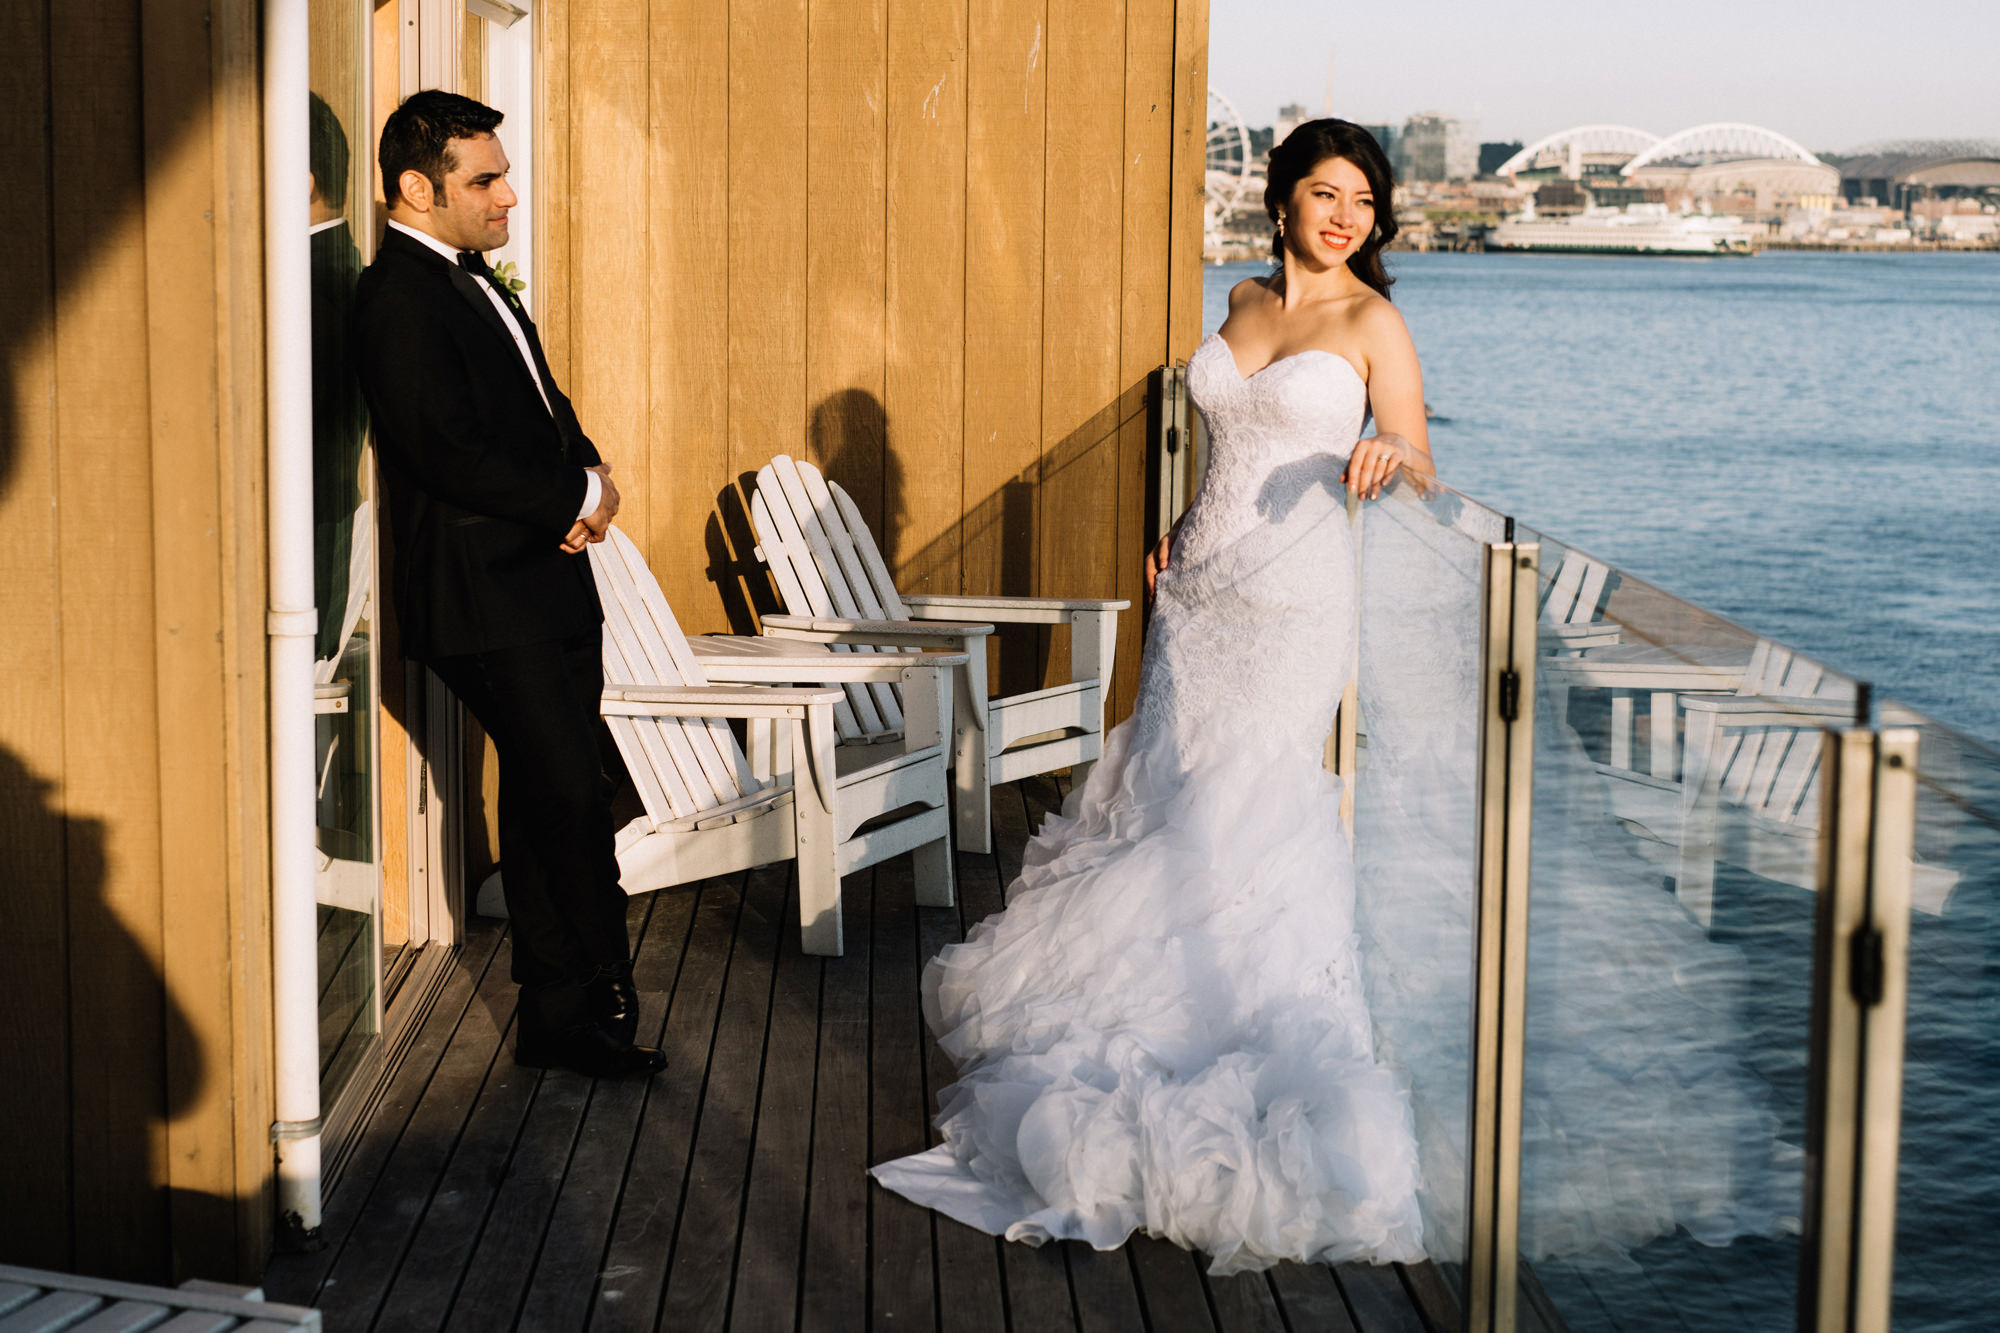 Kelly and Ash at The Edgewater Hotel, Seattle. Photo by Jenn Tai, Seattle Wedding Photographer.